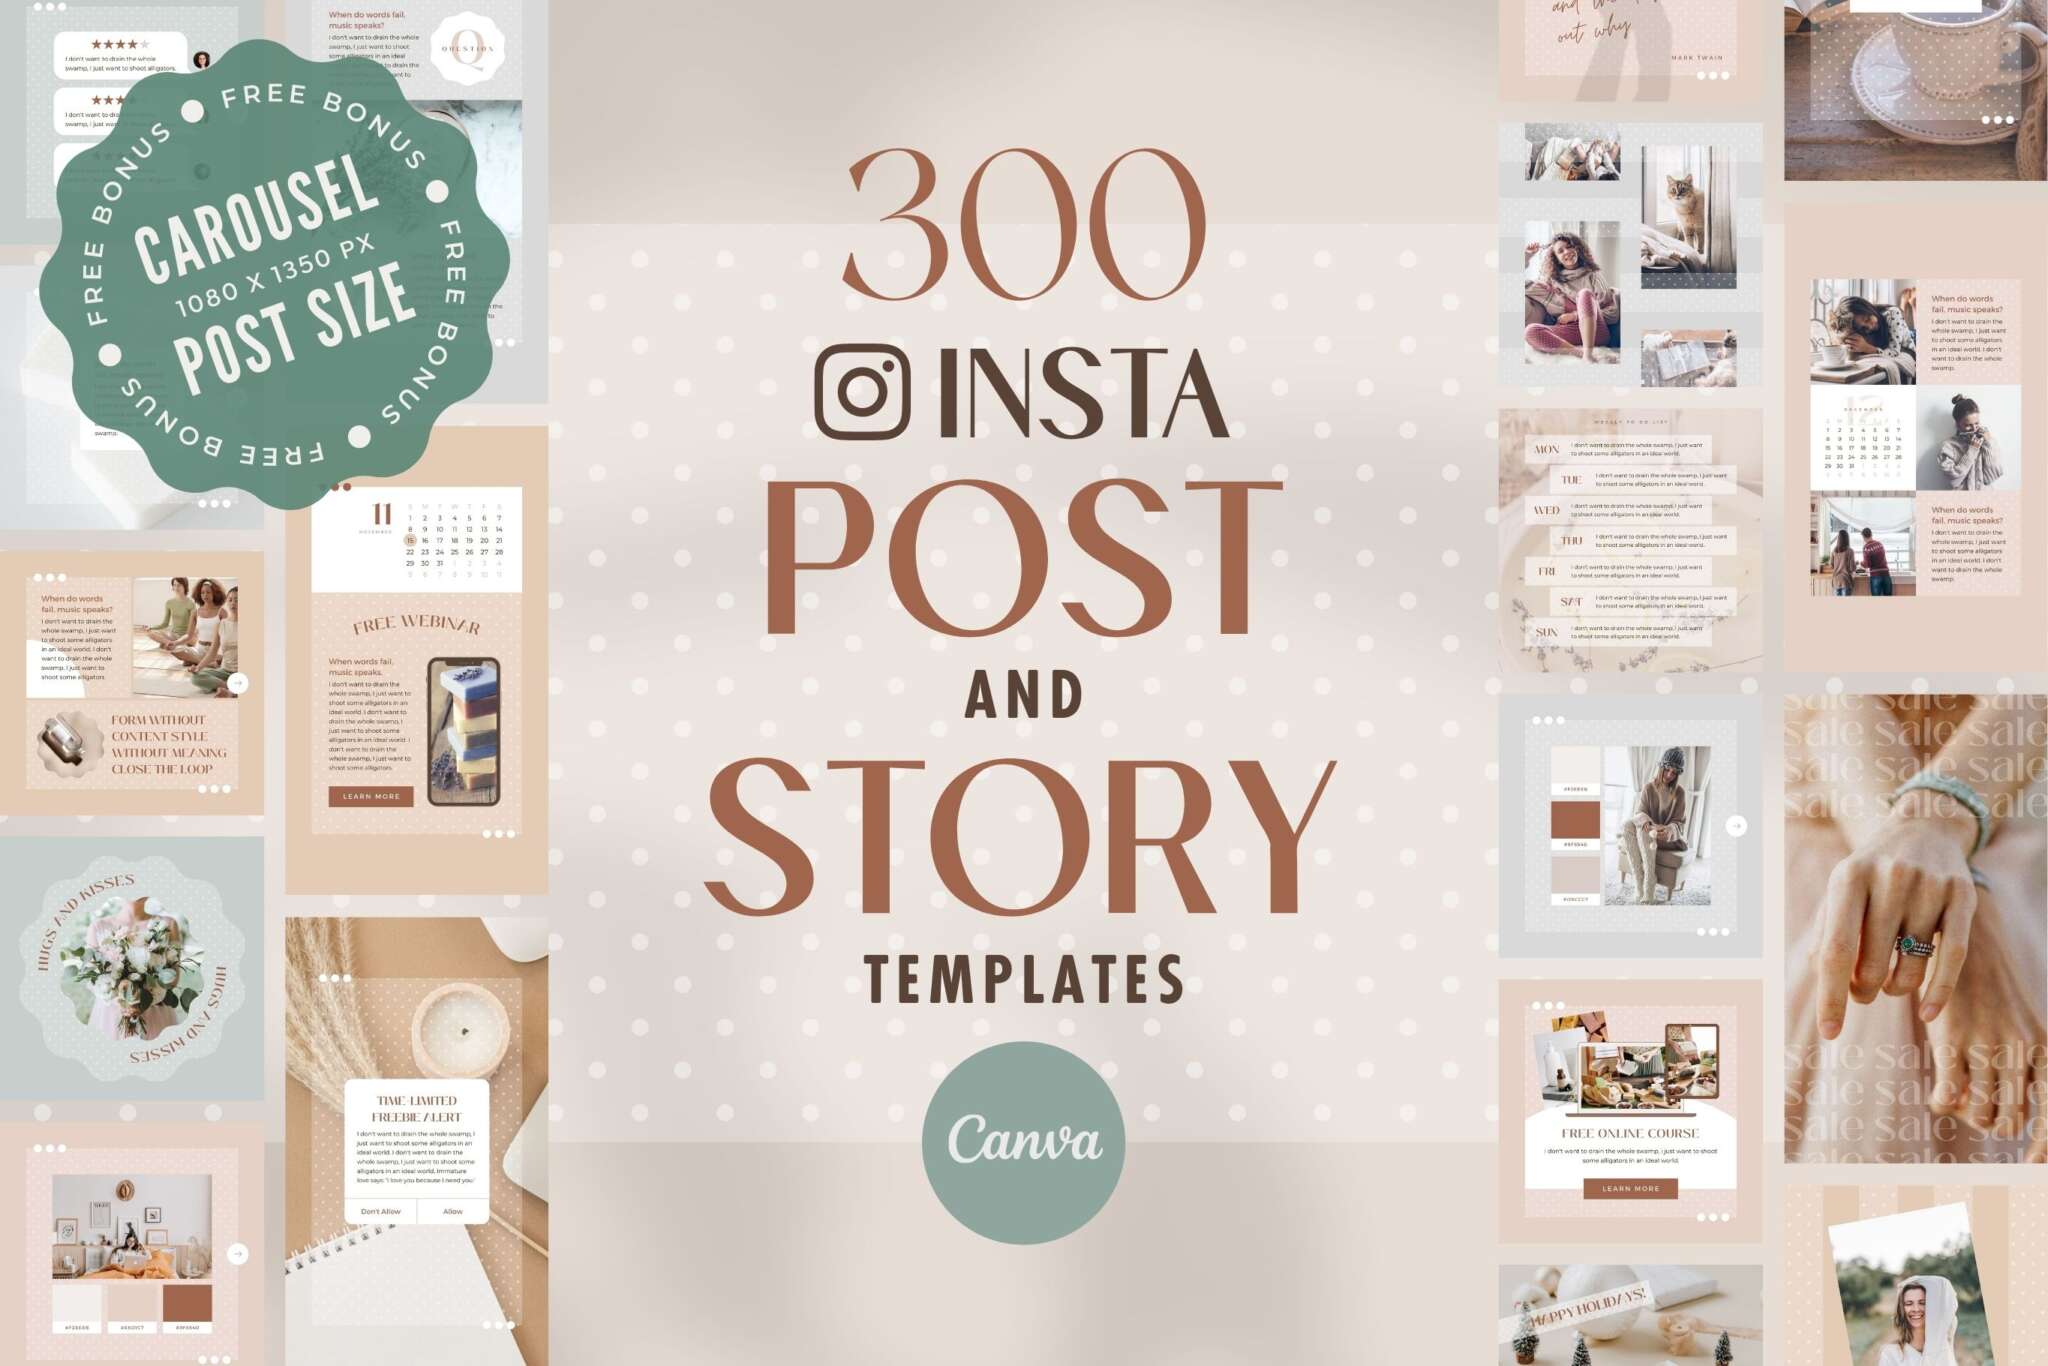 Instagram Template Post Story Canva Polka Dot - Reel Carousel Animated Social Media Pack - Quotes, Notification, CTA